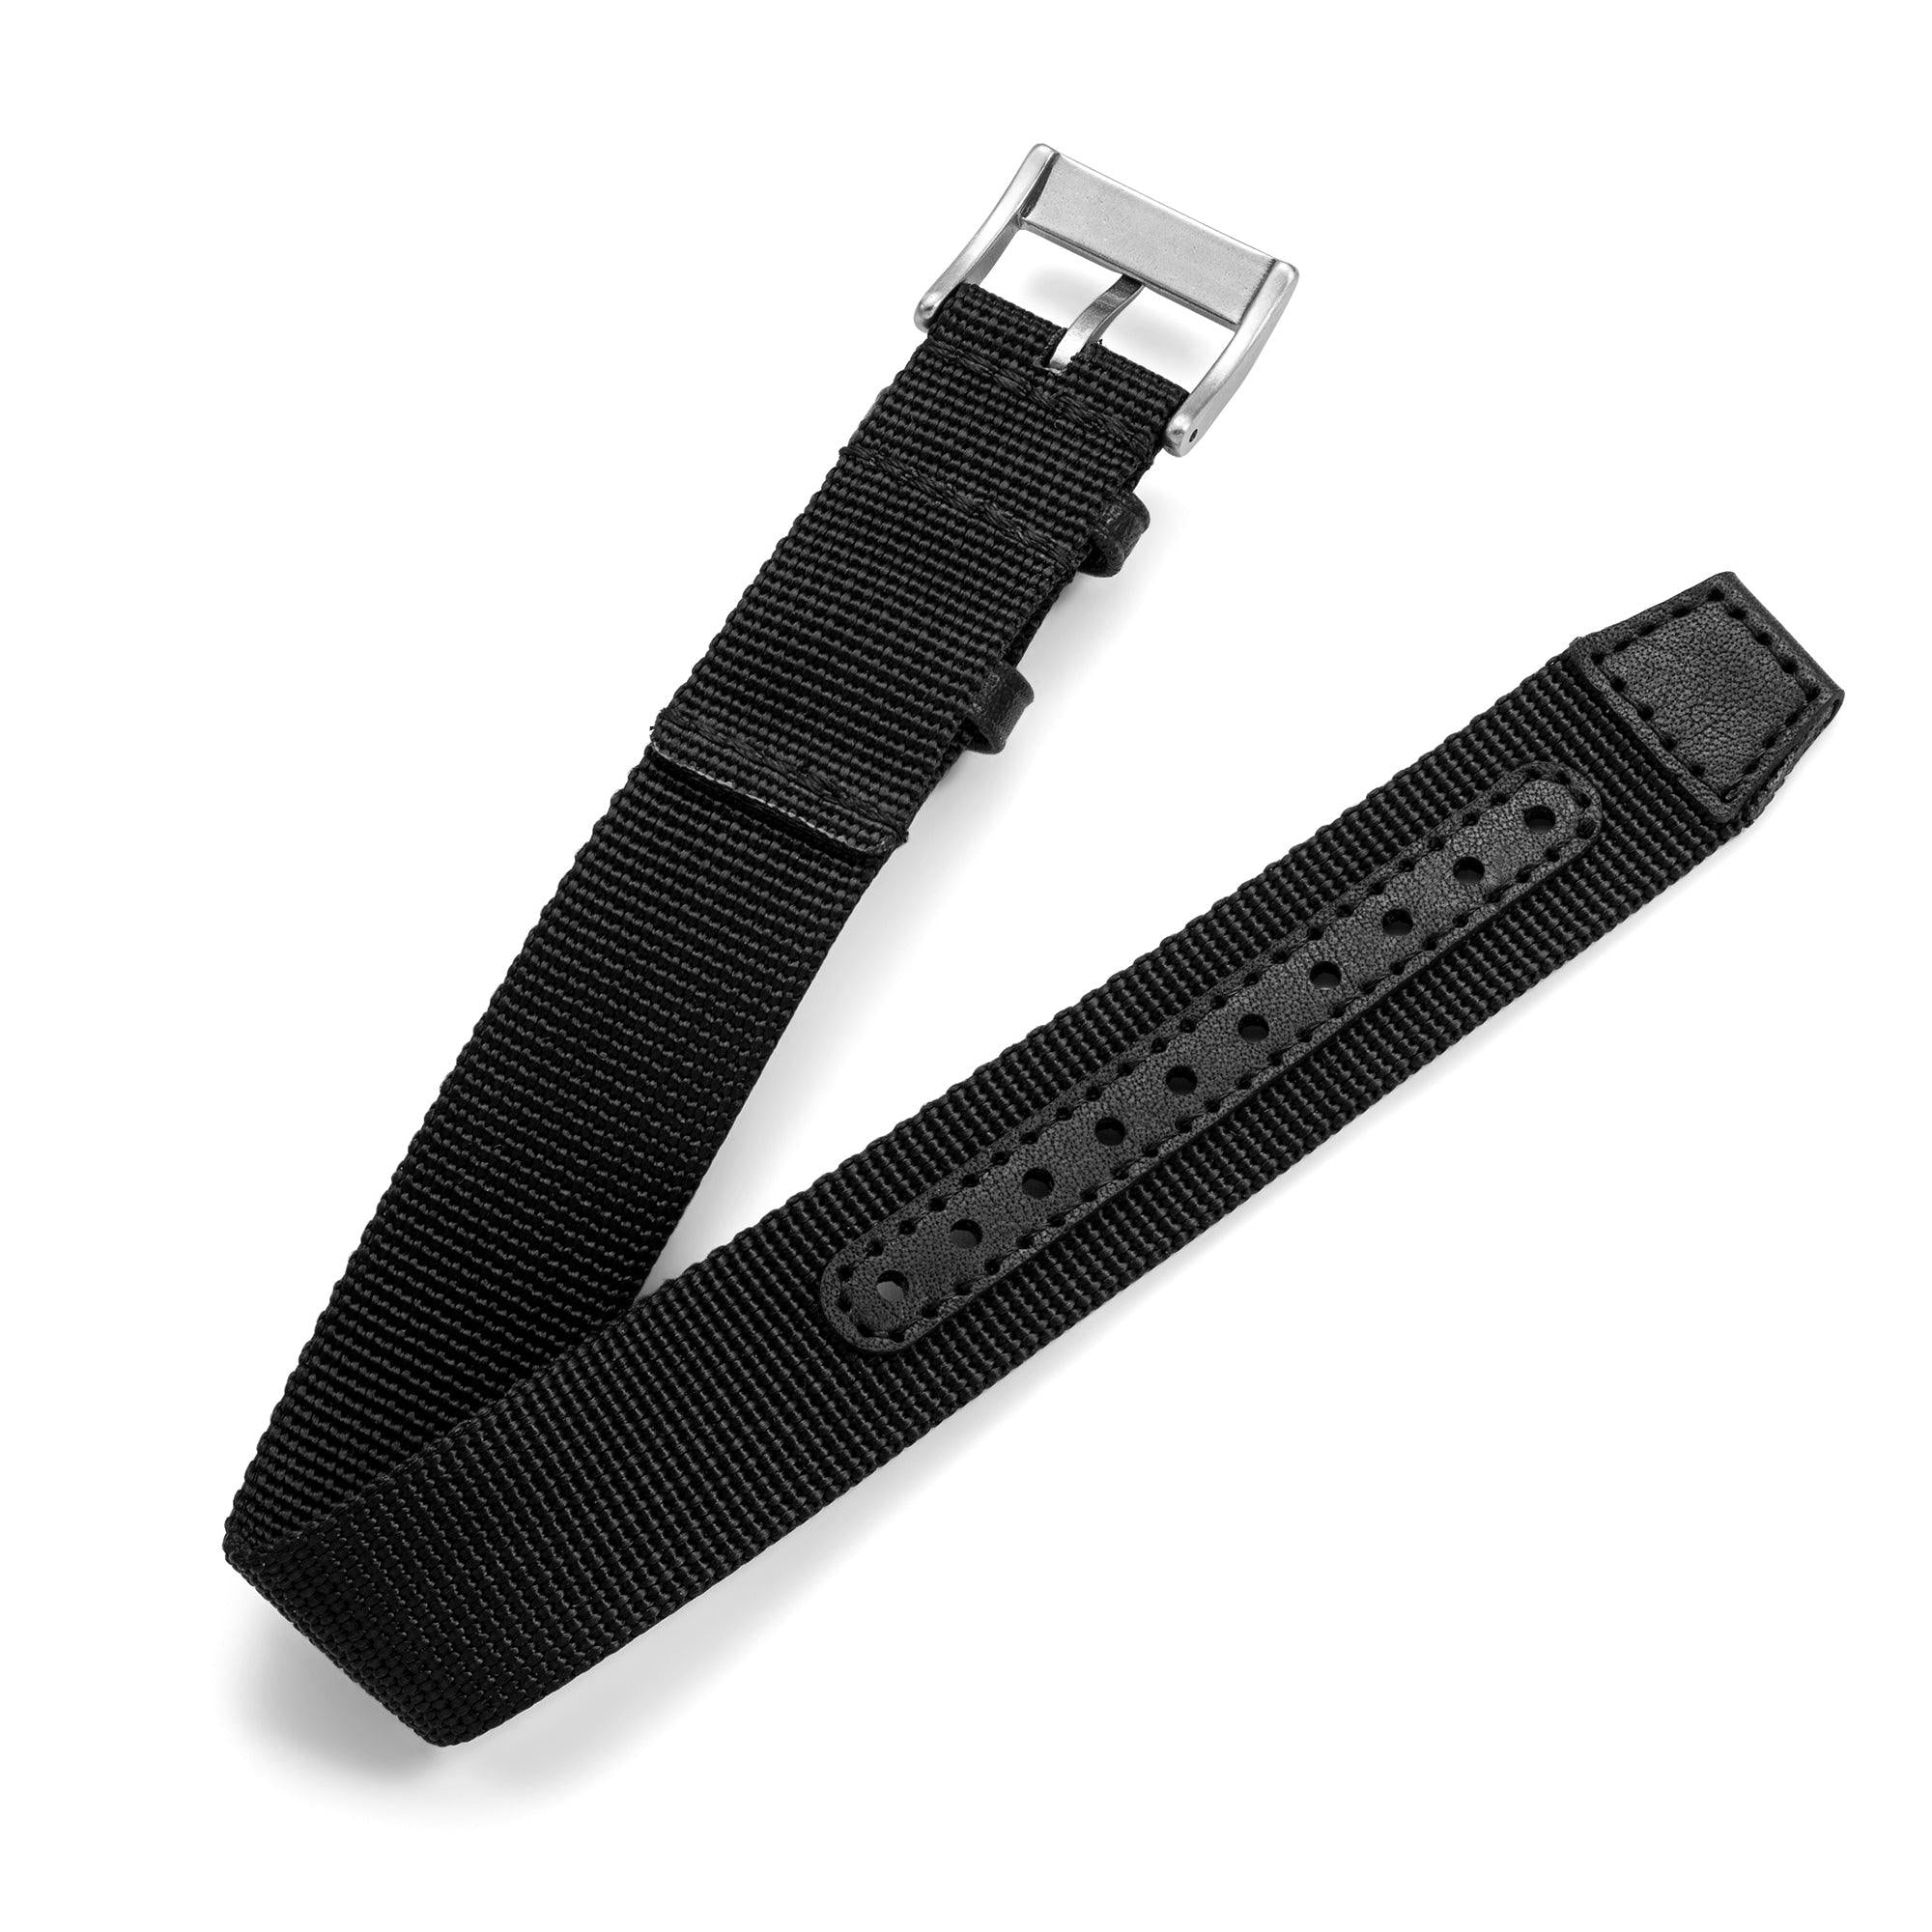 One-Piece Black Nylon Strap & Steel Buckle - Wolbrook Watches